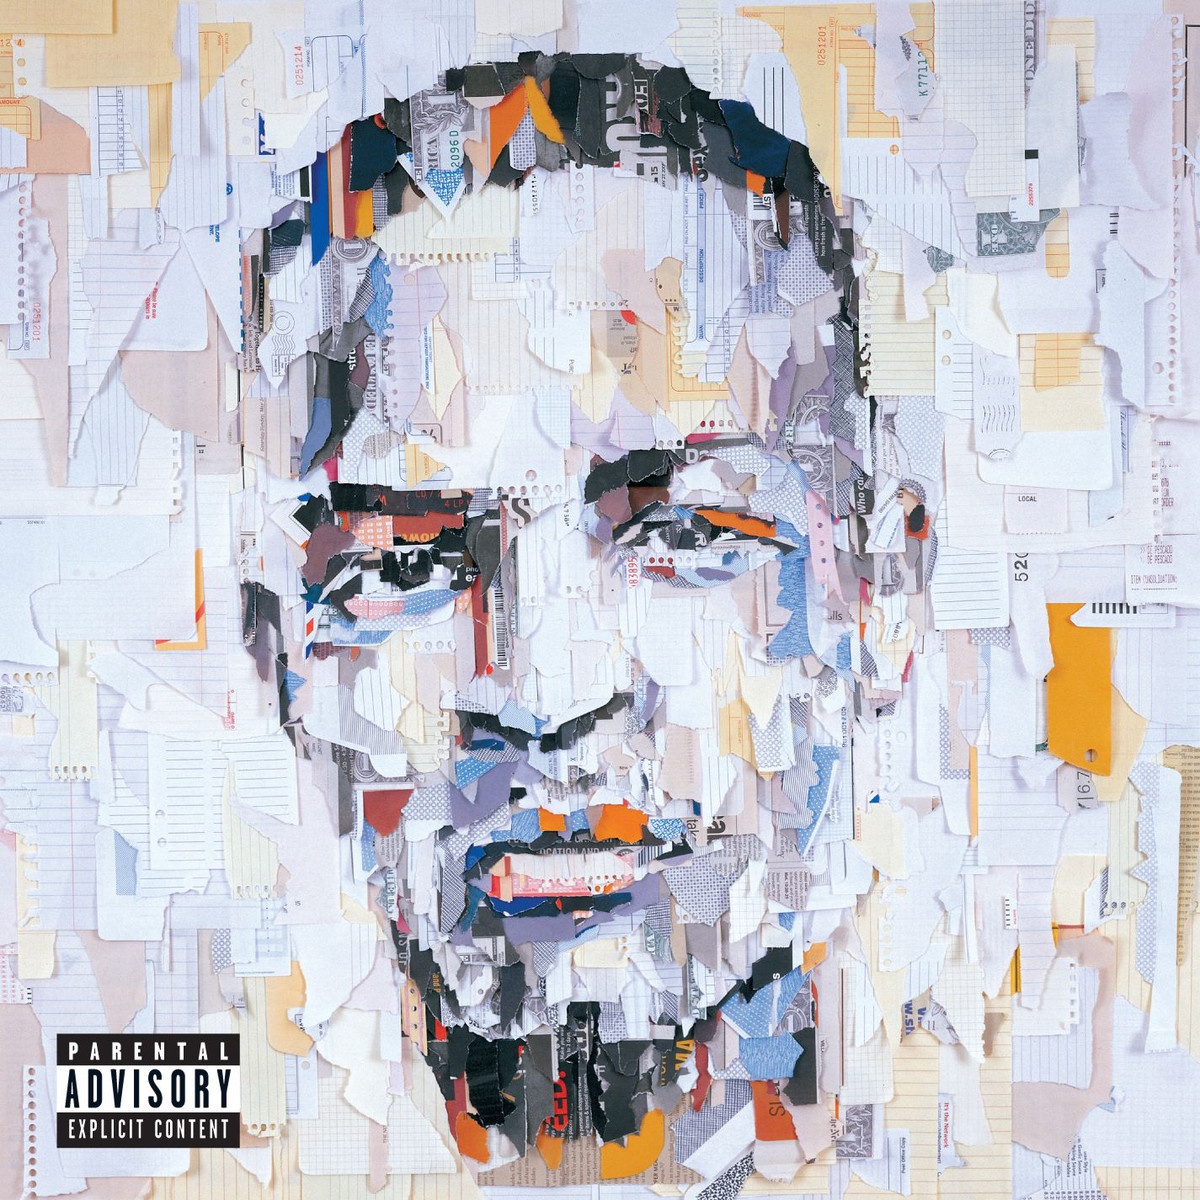 Swagga Like Us [T.I. and Jay-Z feat. Kanye West and Lil' Wayne] (Explicit Album Version)